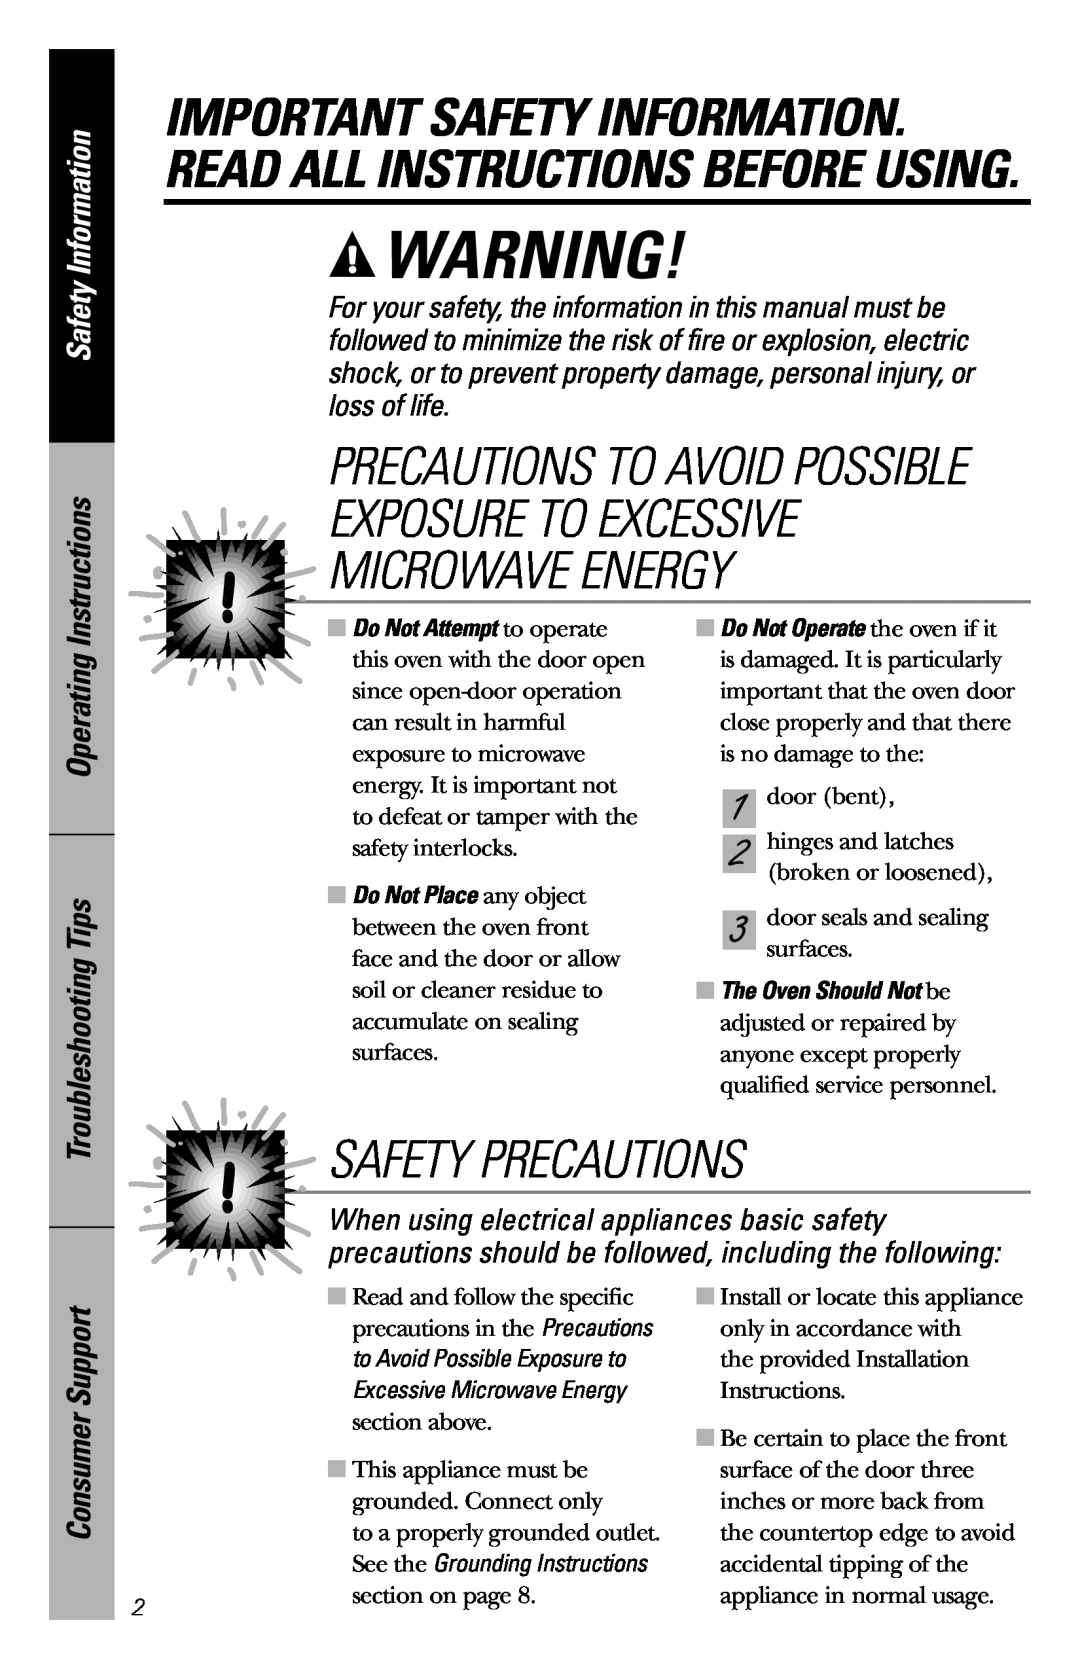 GE JES831 Safety Precautions, Important Safety Information. Read All Instructions Before Using, Consumer Support 